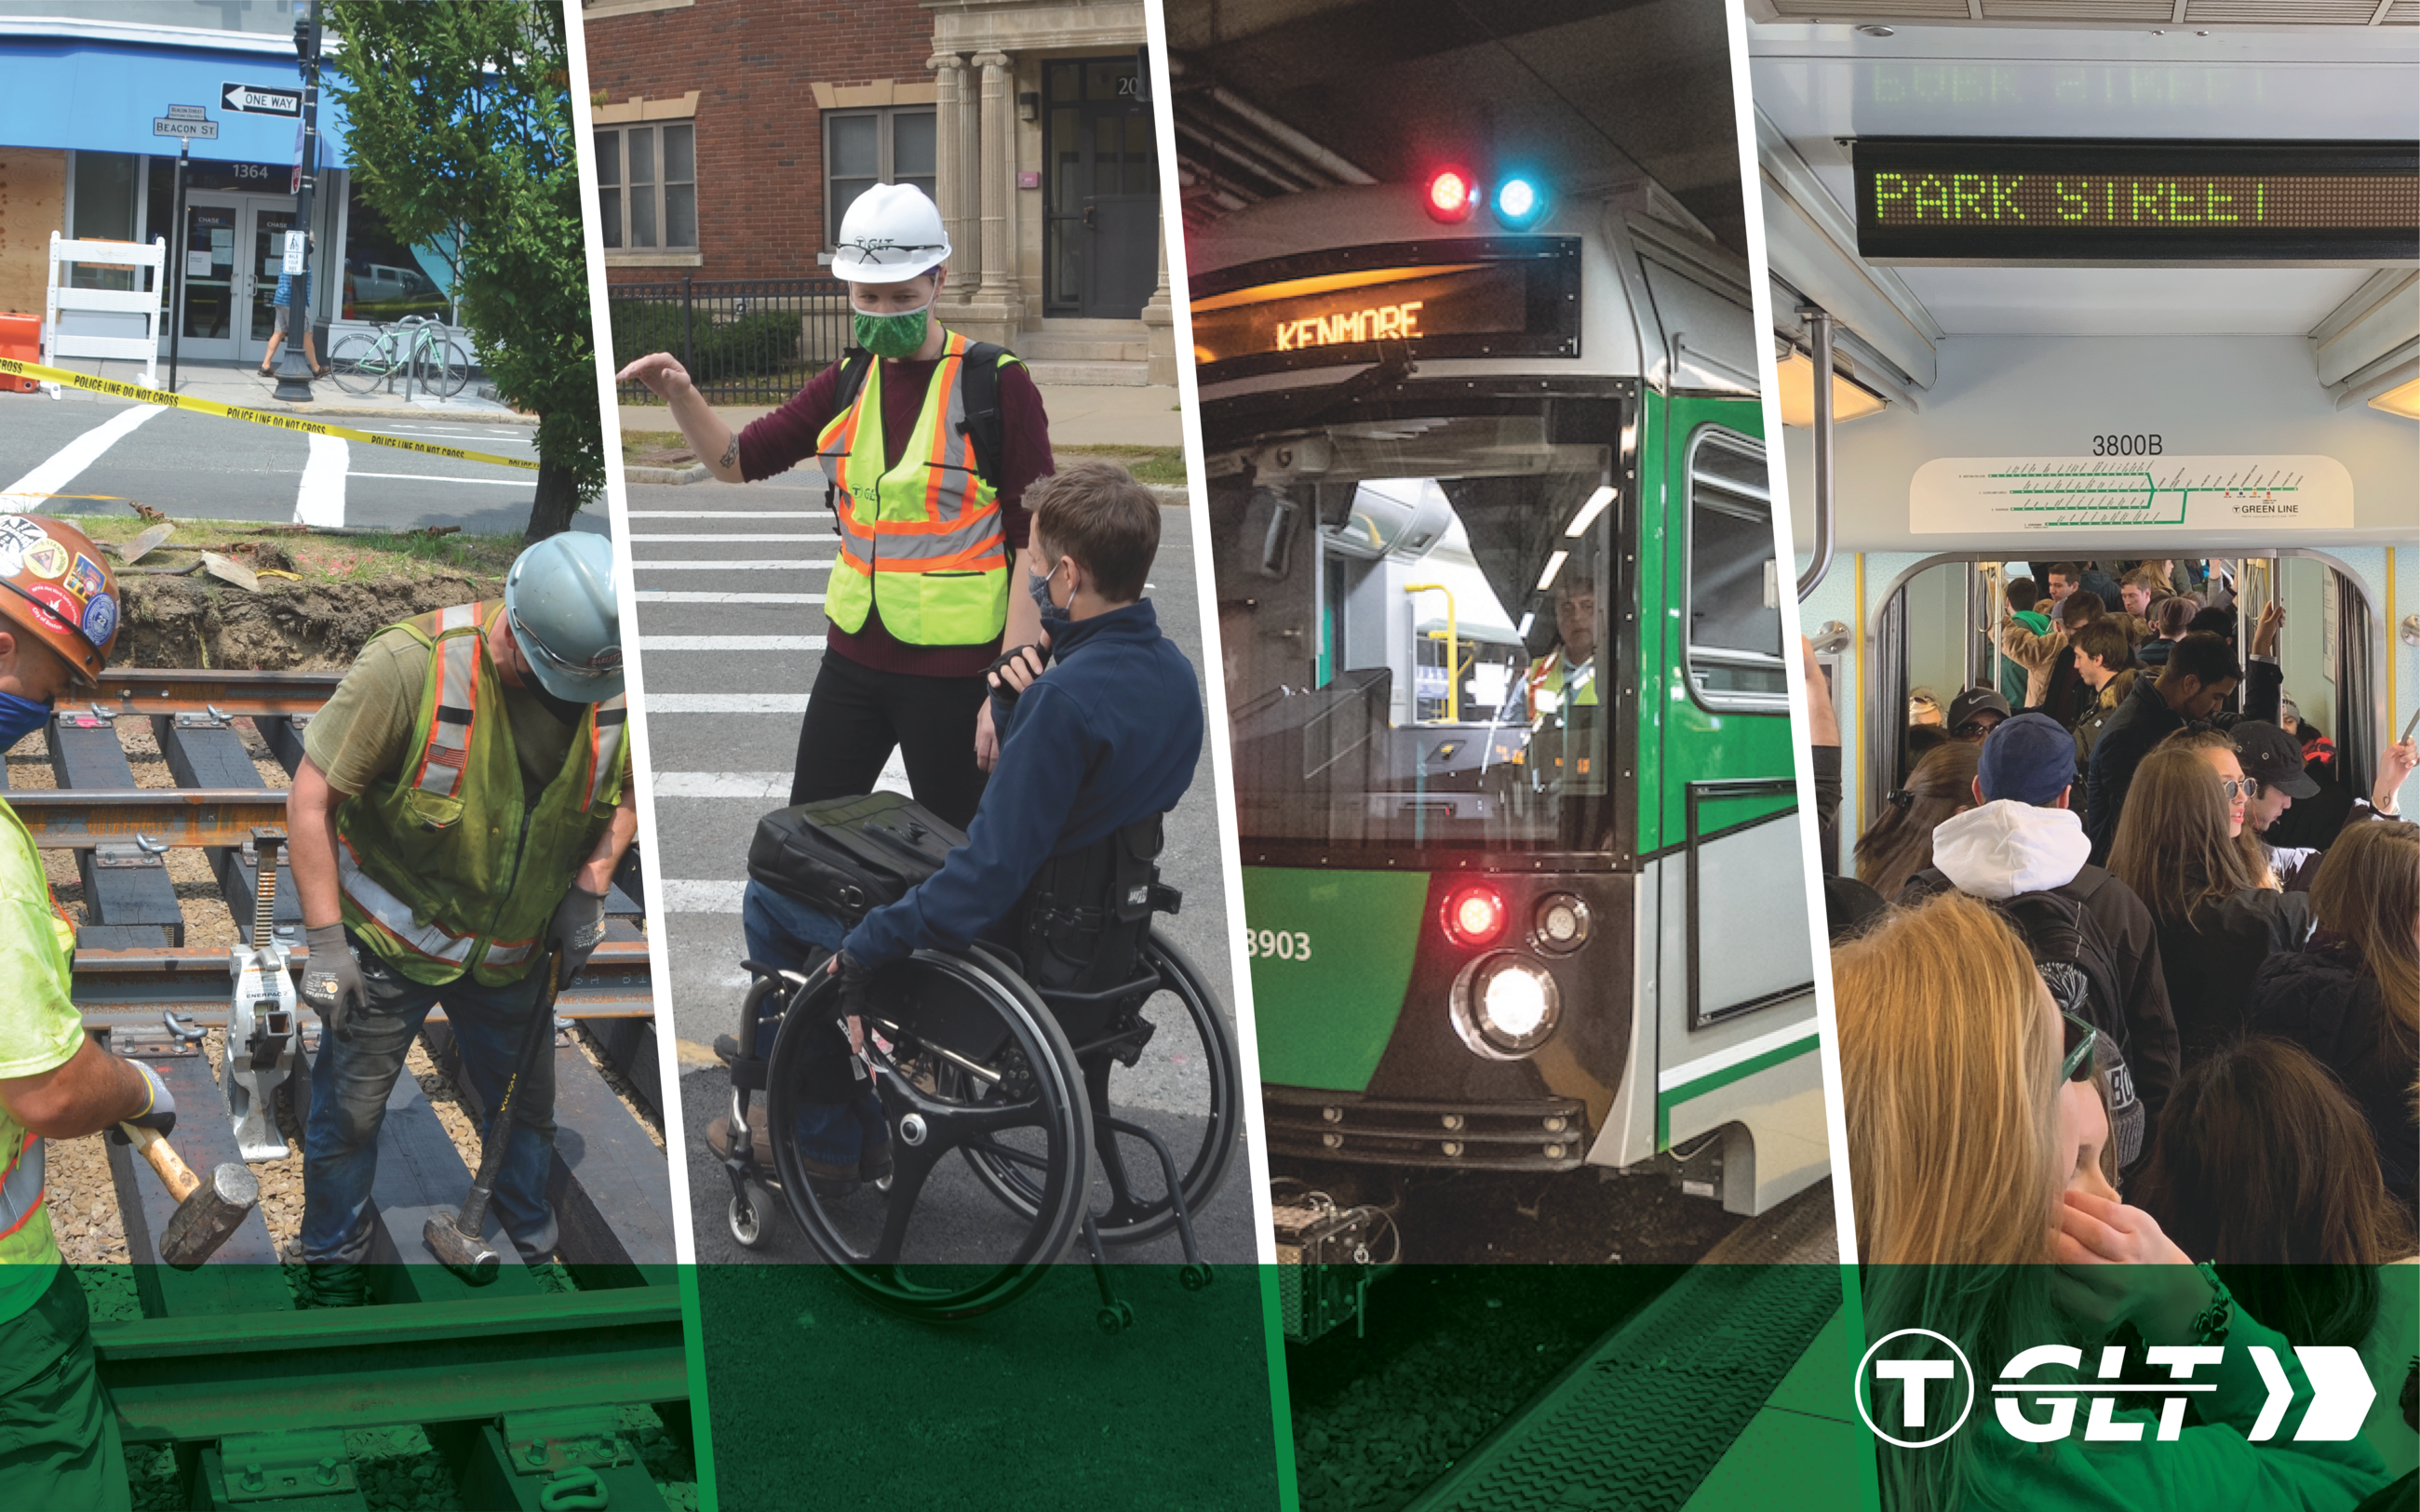 four photos: two construction workers tamping down tracks, a person in a GLT hard hat directing a person in a wheelchair, a new green line train, and a green line trolley car full of riders heading to Park Street. There's a GLT logo banner at the bottom going across all four photos